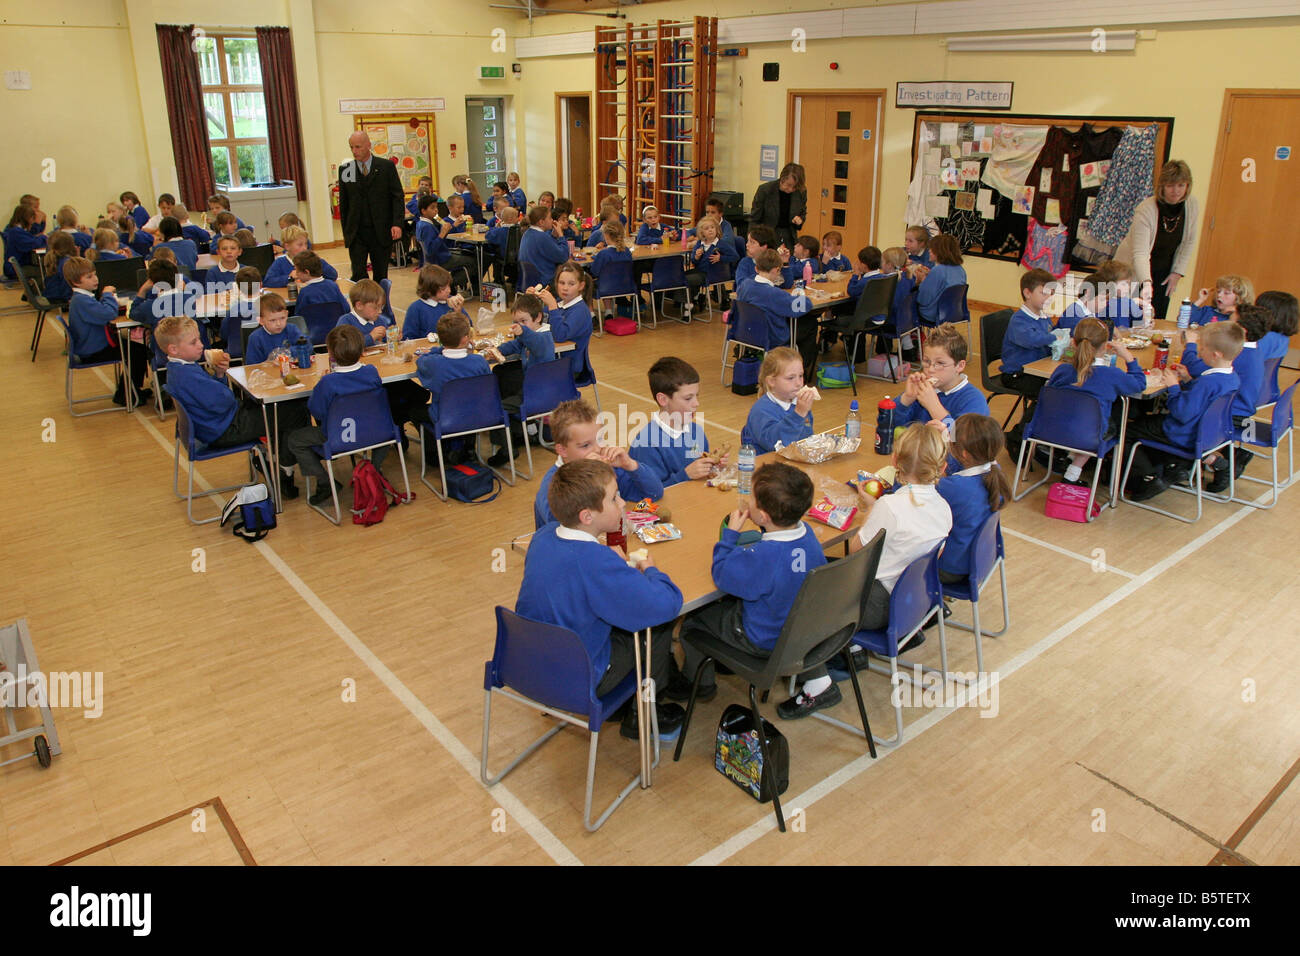 School dinners at a primary school in Cambridge, England Stock Photo